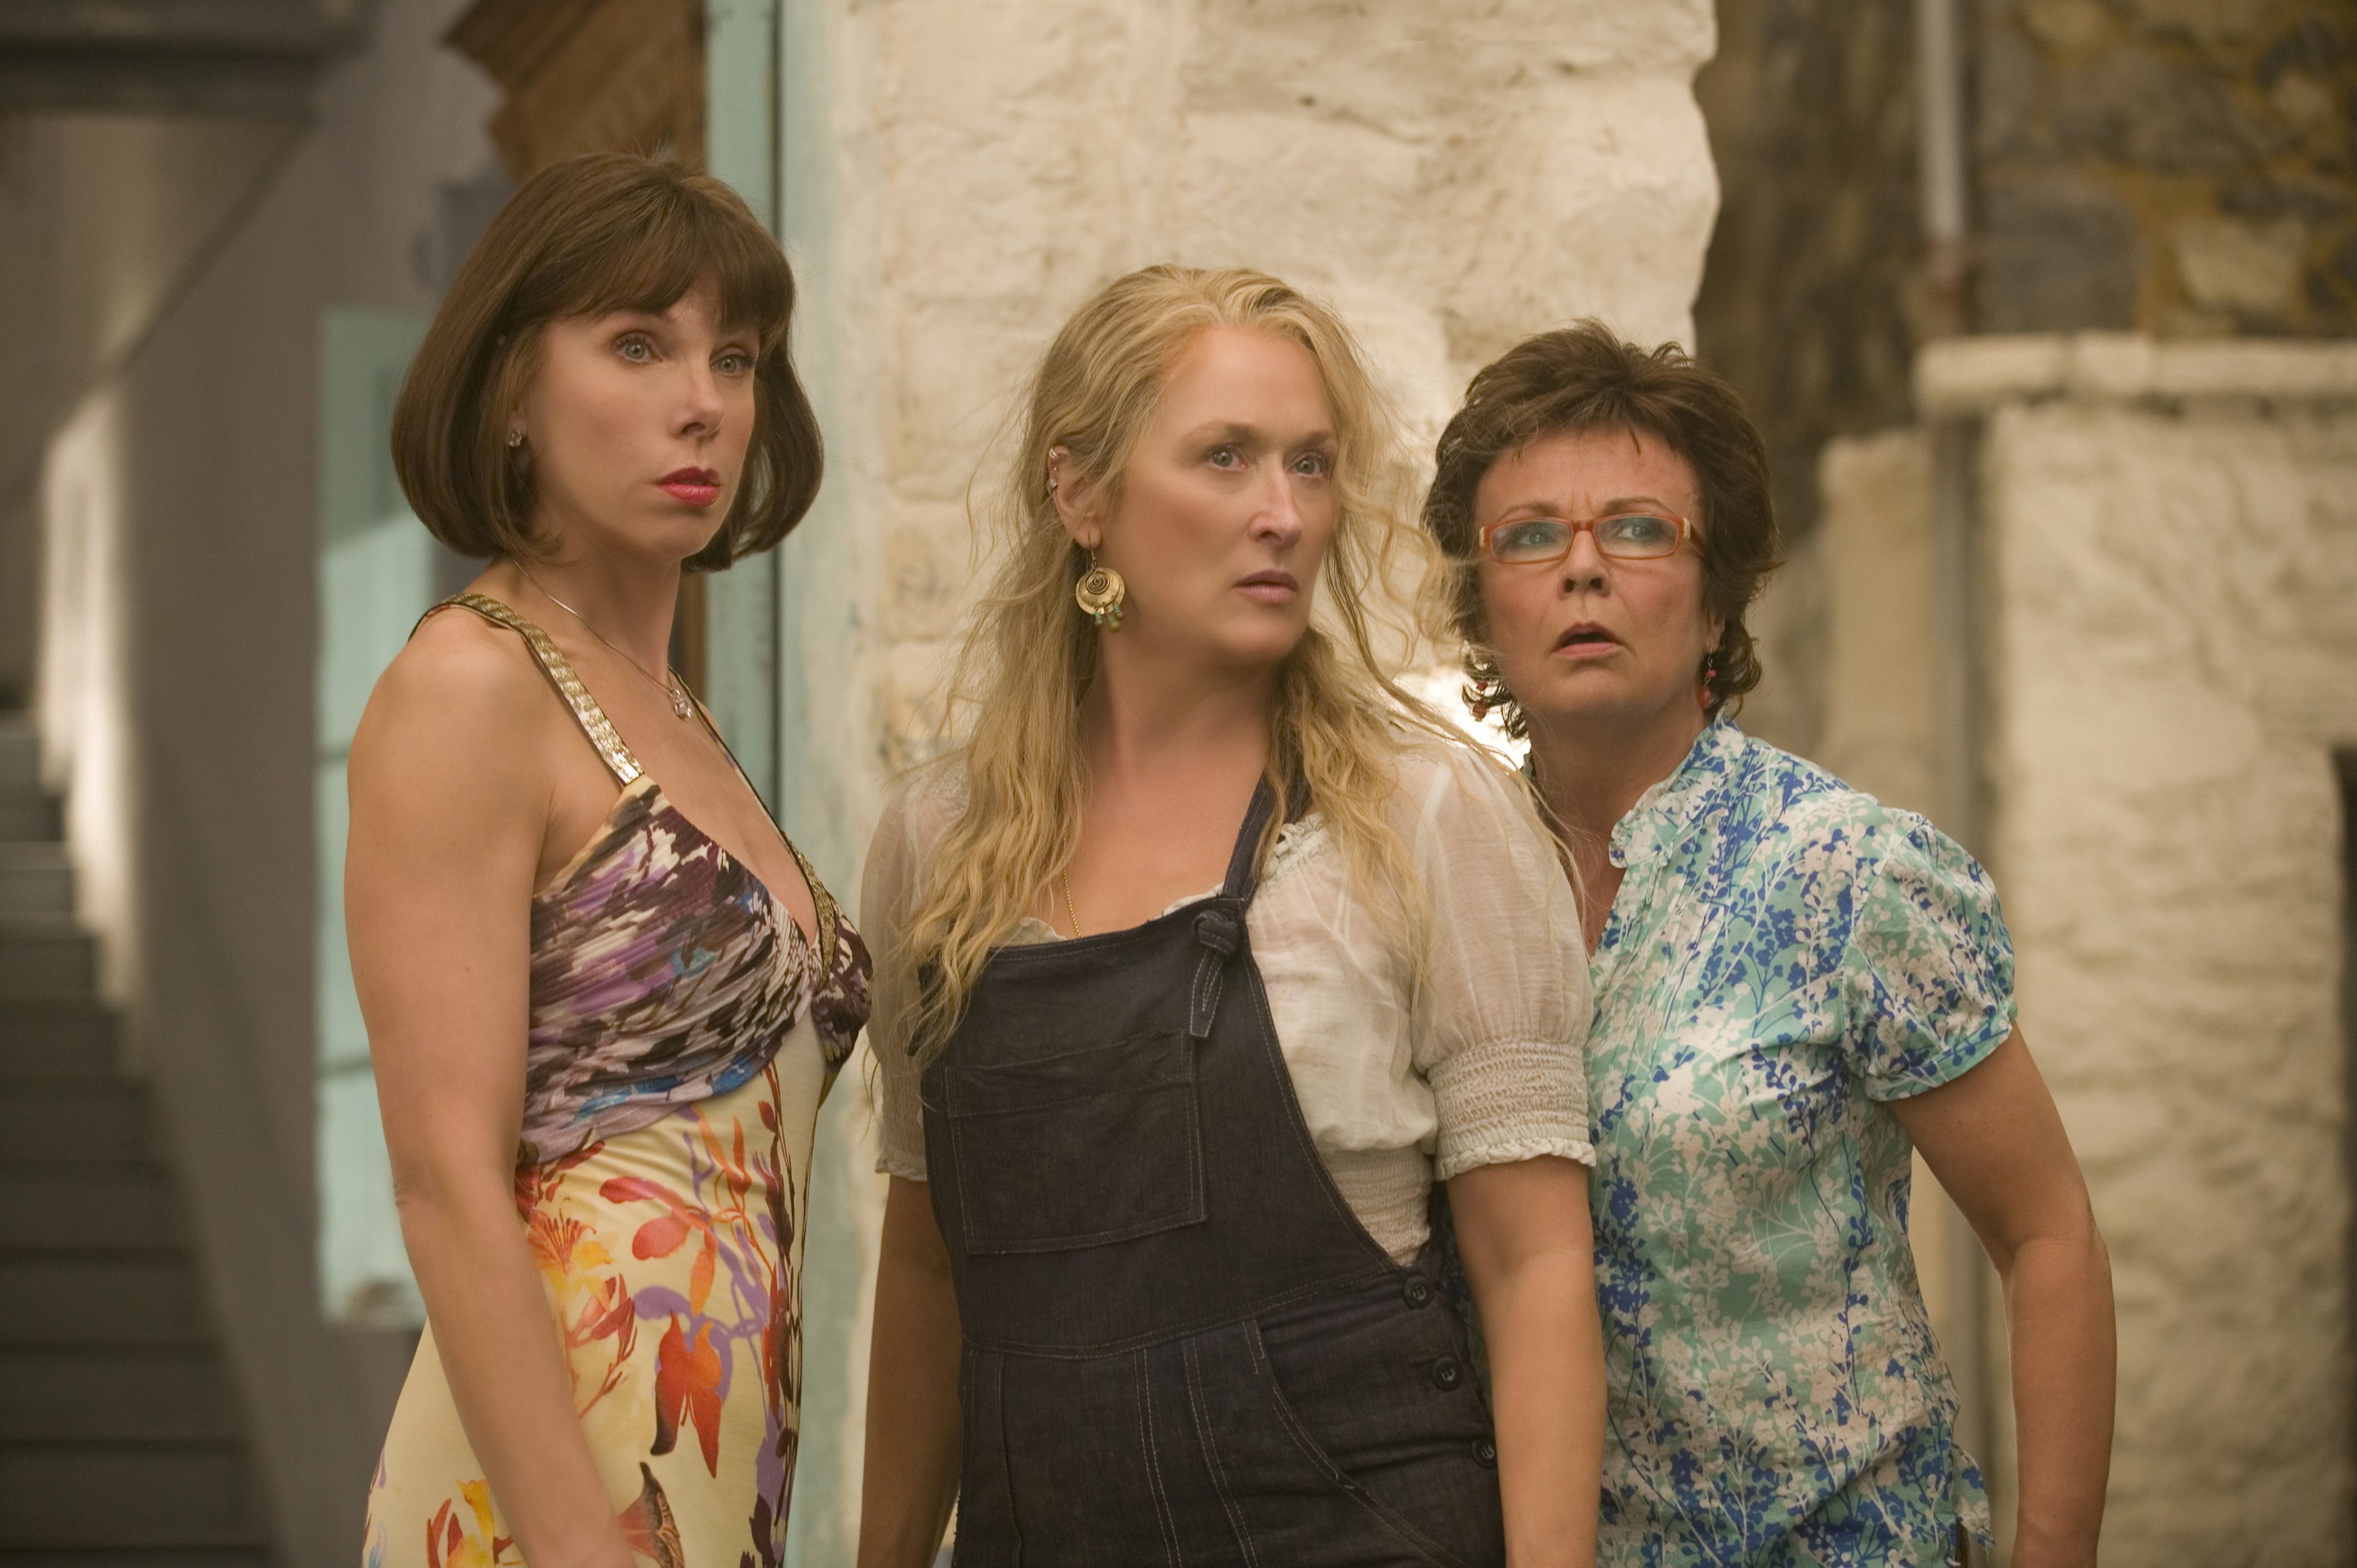 4. "Meryl Streep" - The actress who plays the main character with blonde hair in "Mamma Mia!" - wide 10